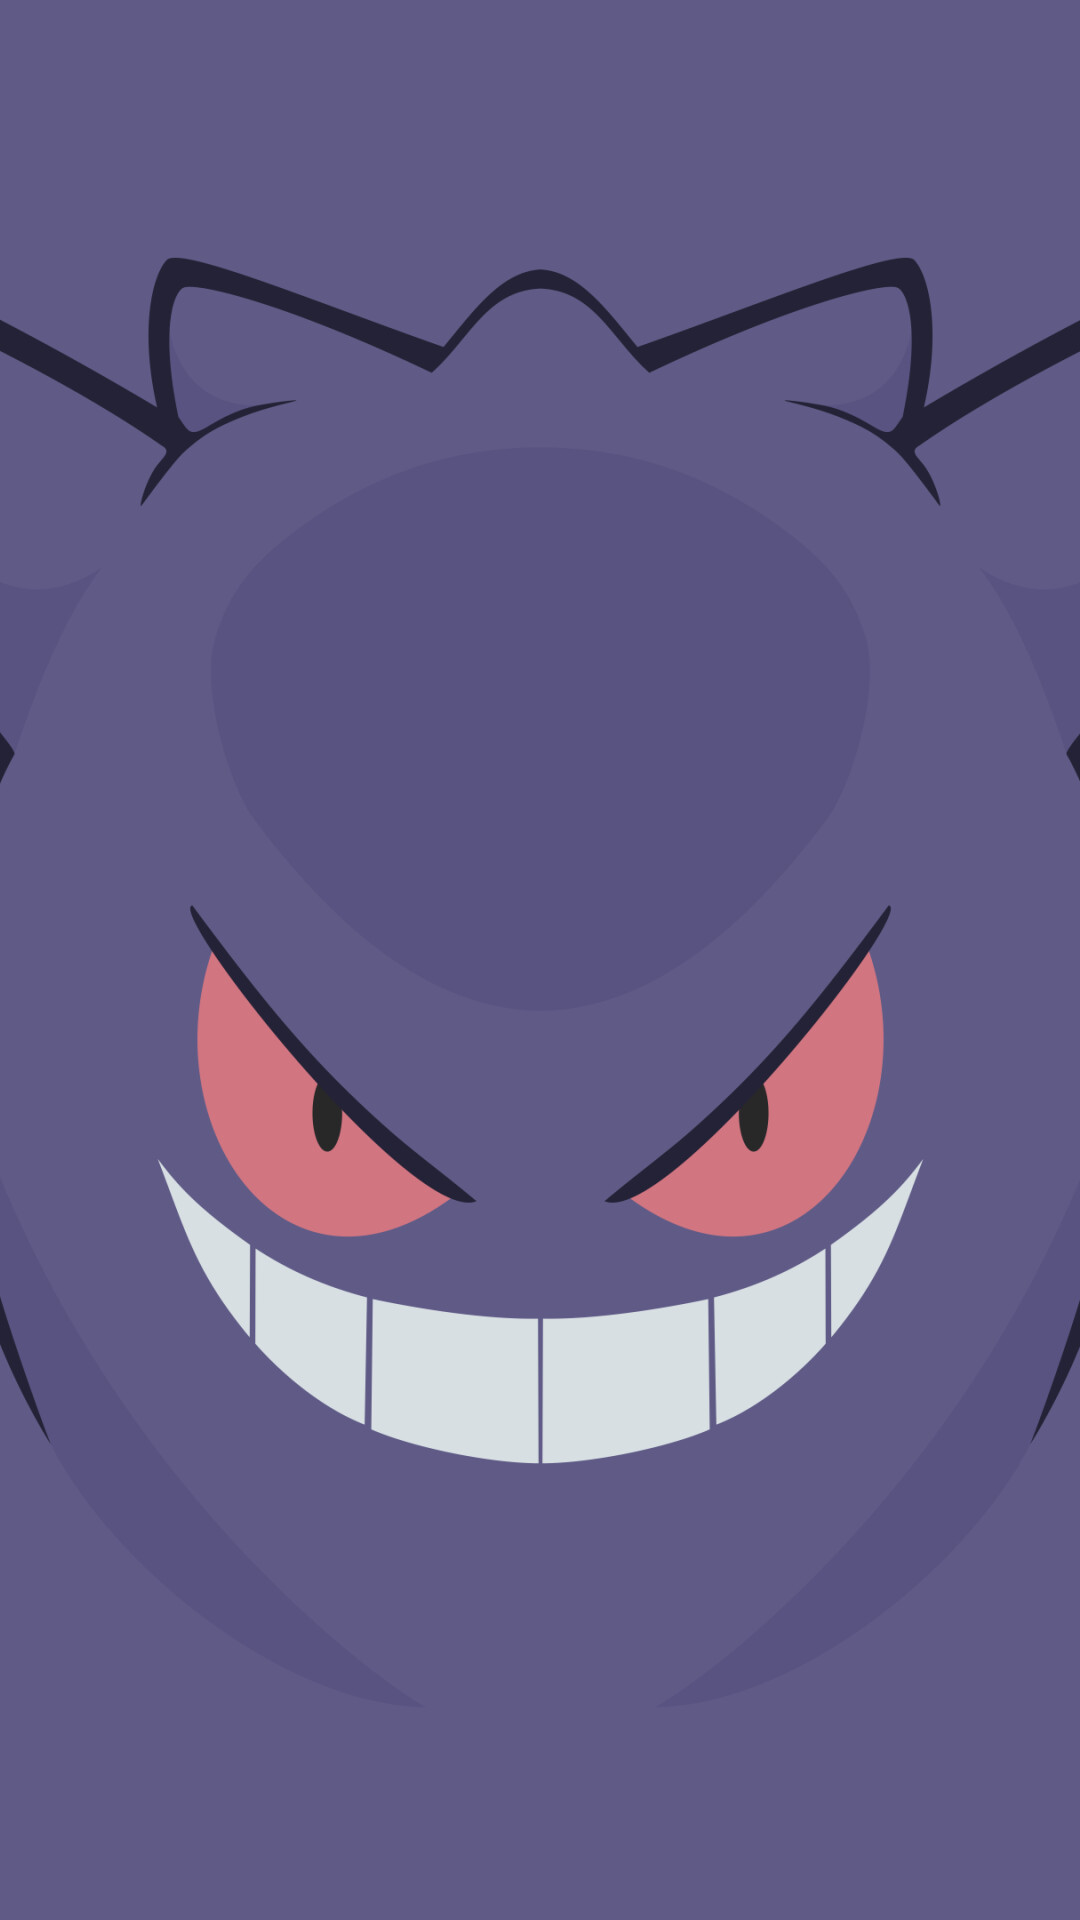 Gengar: Two red eyes, A toothy, sinister smile, Active during full moons. 1080x1920 Full HD Background.